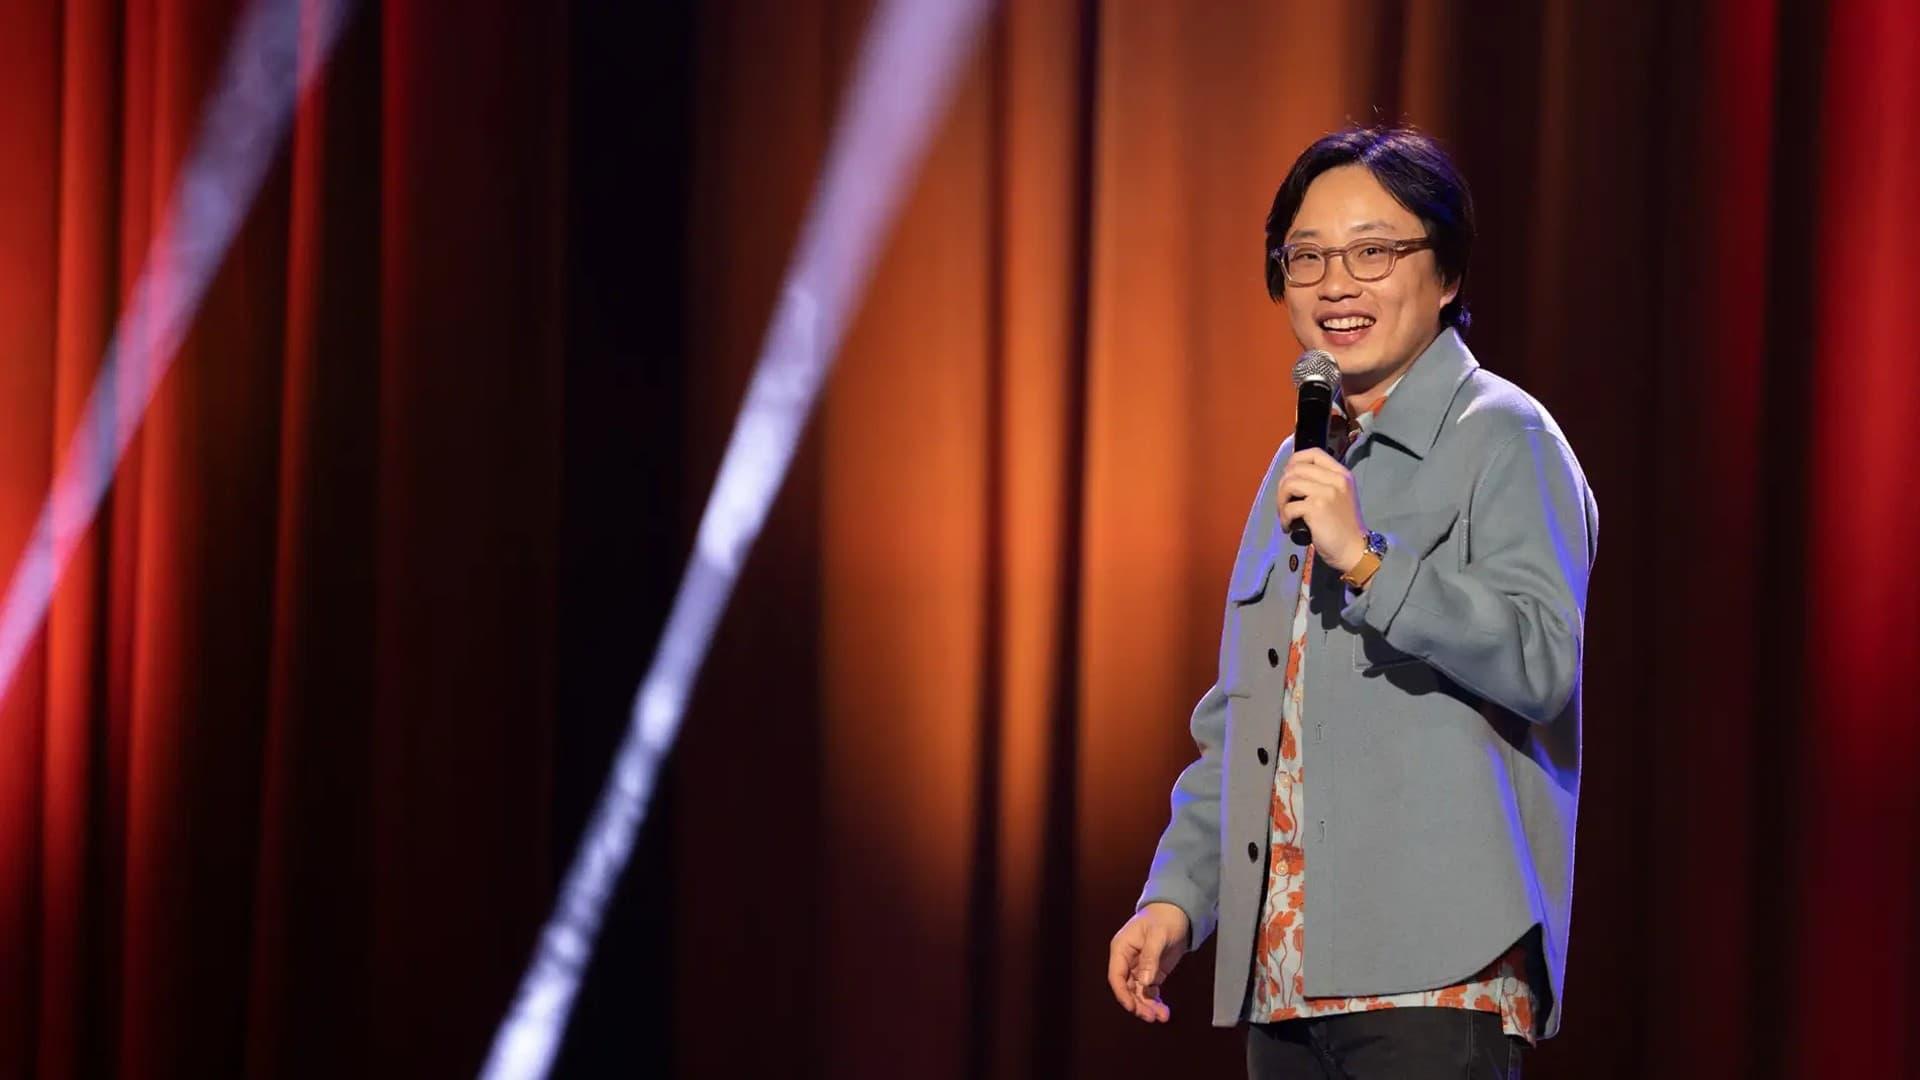 Jimmy O. Yang: Guess How Much? backdrop